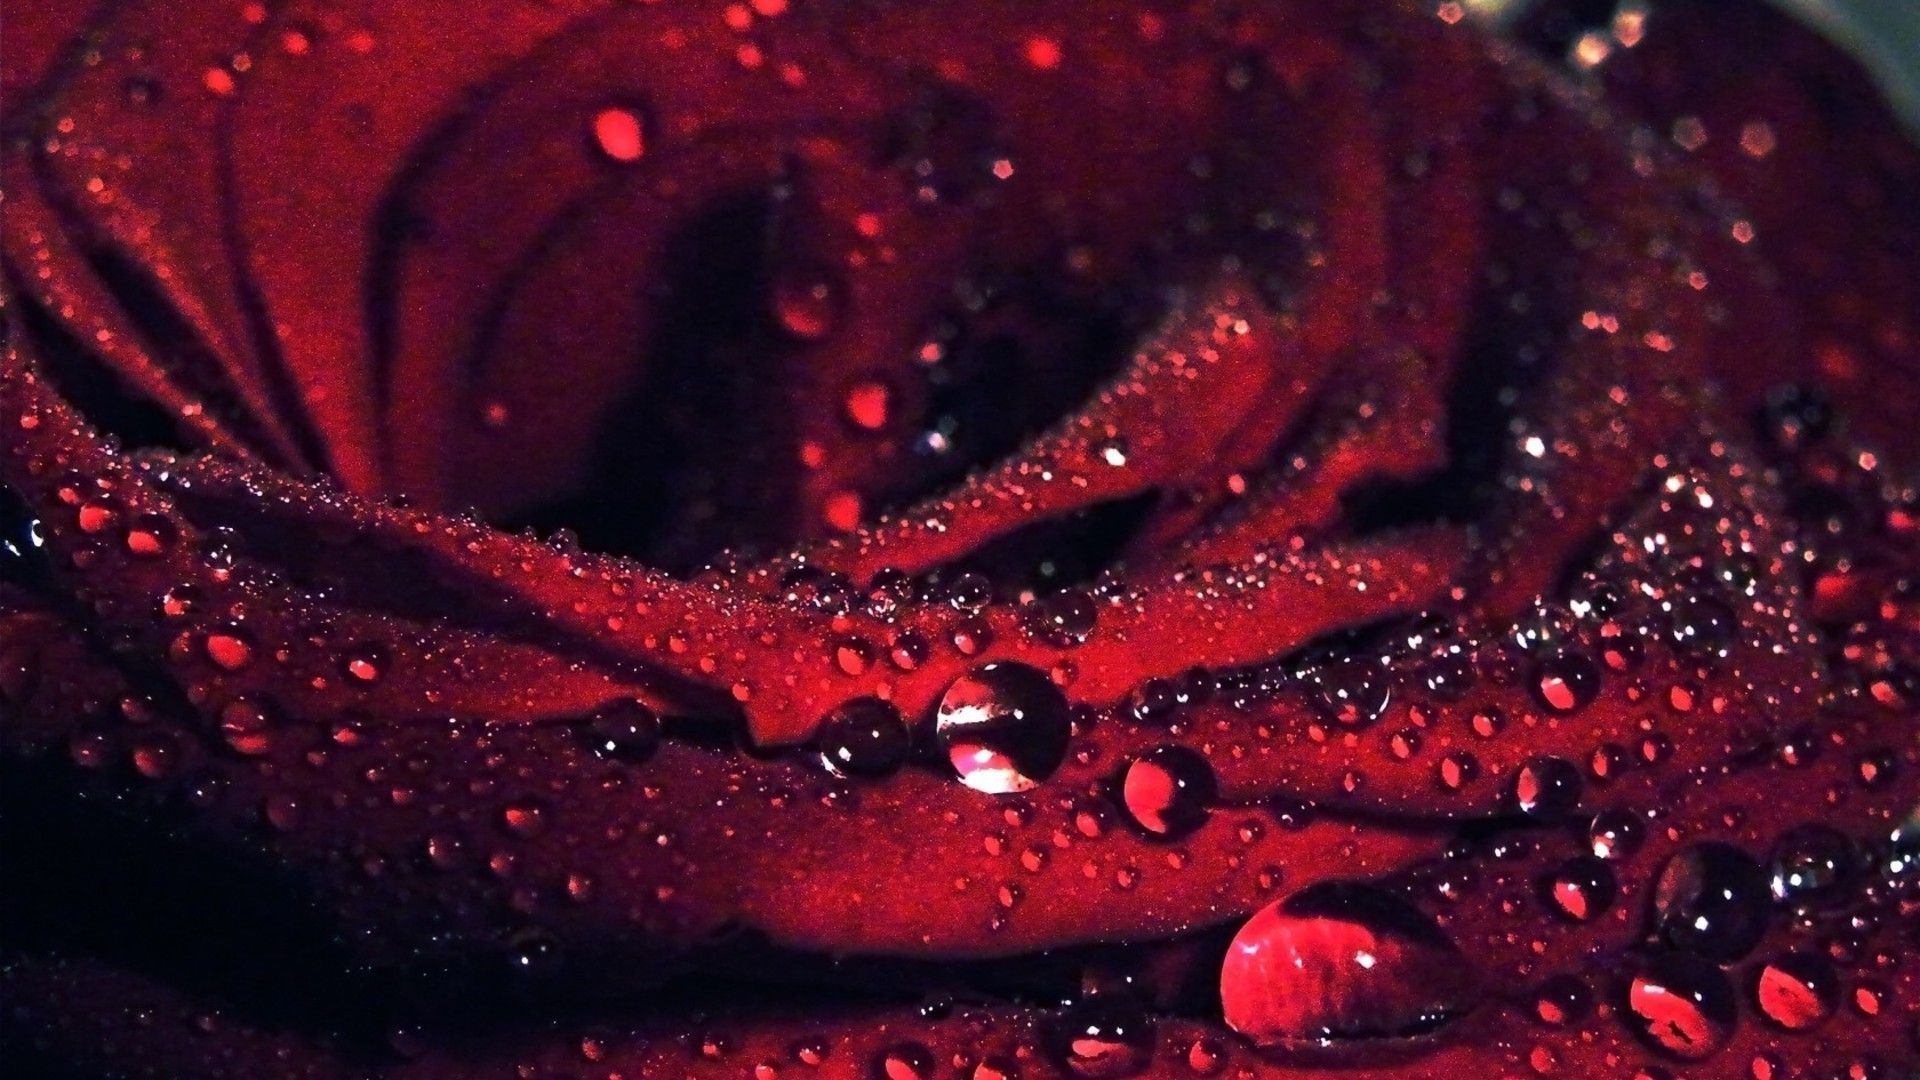 Rose with Water Drops Wallpaper